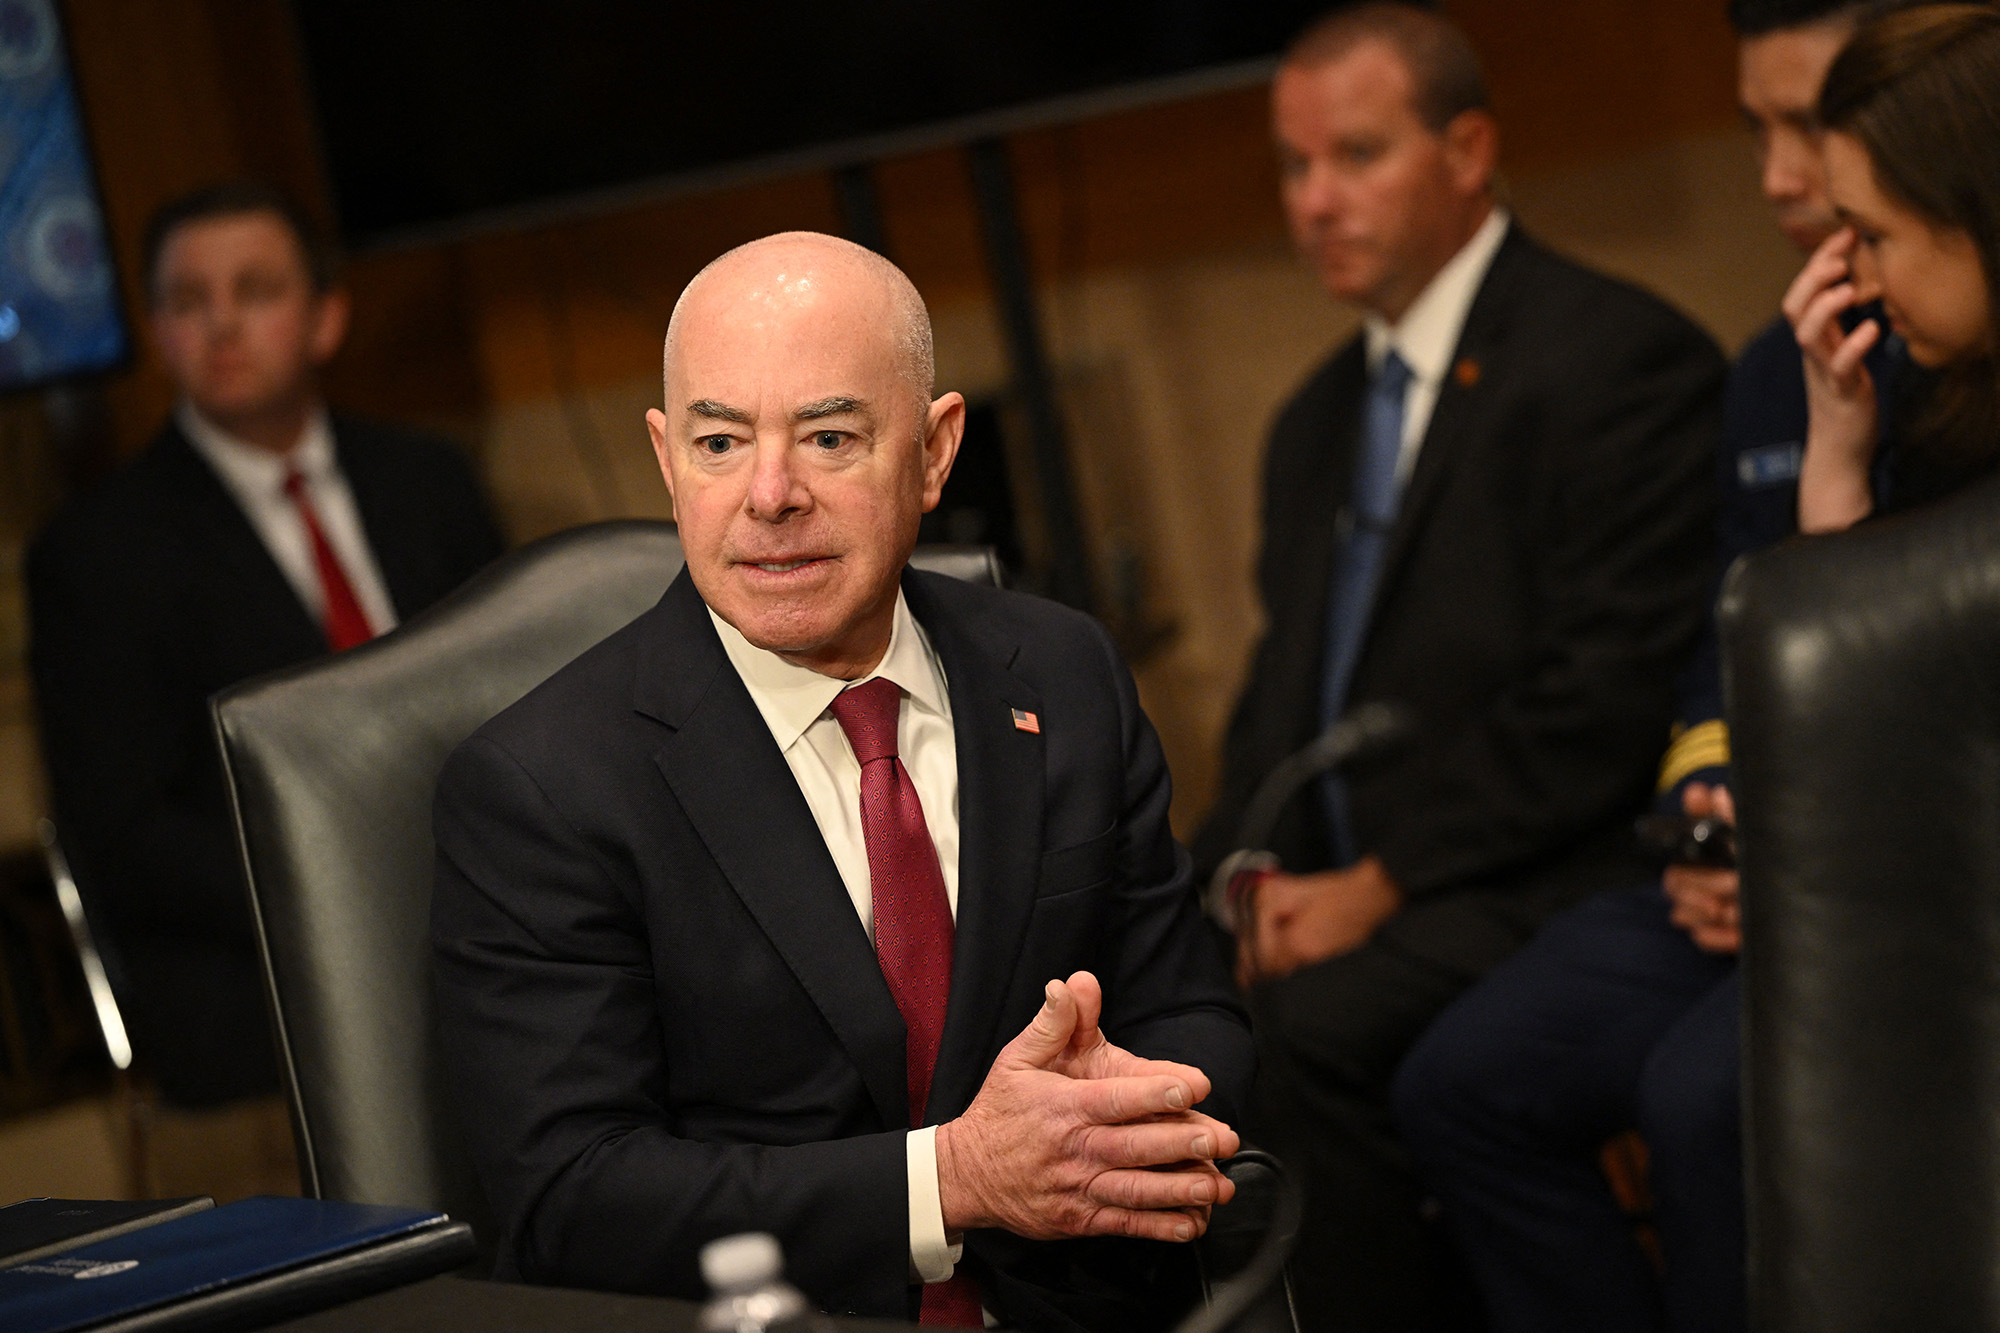 US Homeland Security Secretary Alejandro Mayorkas arrives to testify during a Senate Homeland Security and Government Affairs Committee hearing on Capitol Hill in Washington, DC, on October 31.